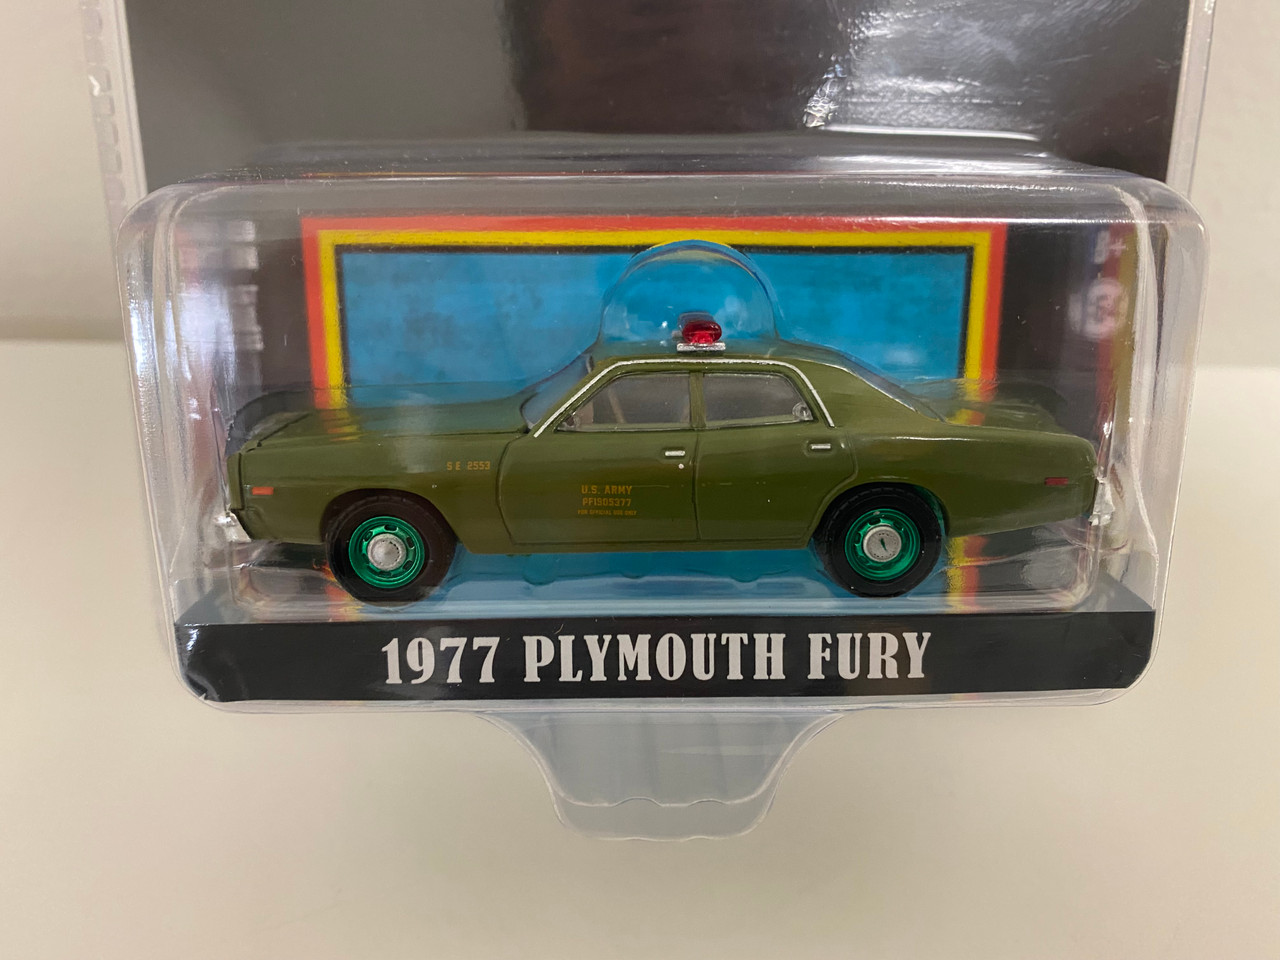 CHASE CAR 1/64 Greenlight 1977 Plymouth Fury "U.S. Army Police" Army Green "The A-Team" (1983-1987) TV Series "Hollywood Special Edition" Diecast Car Model